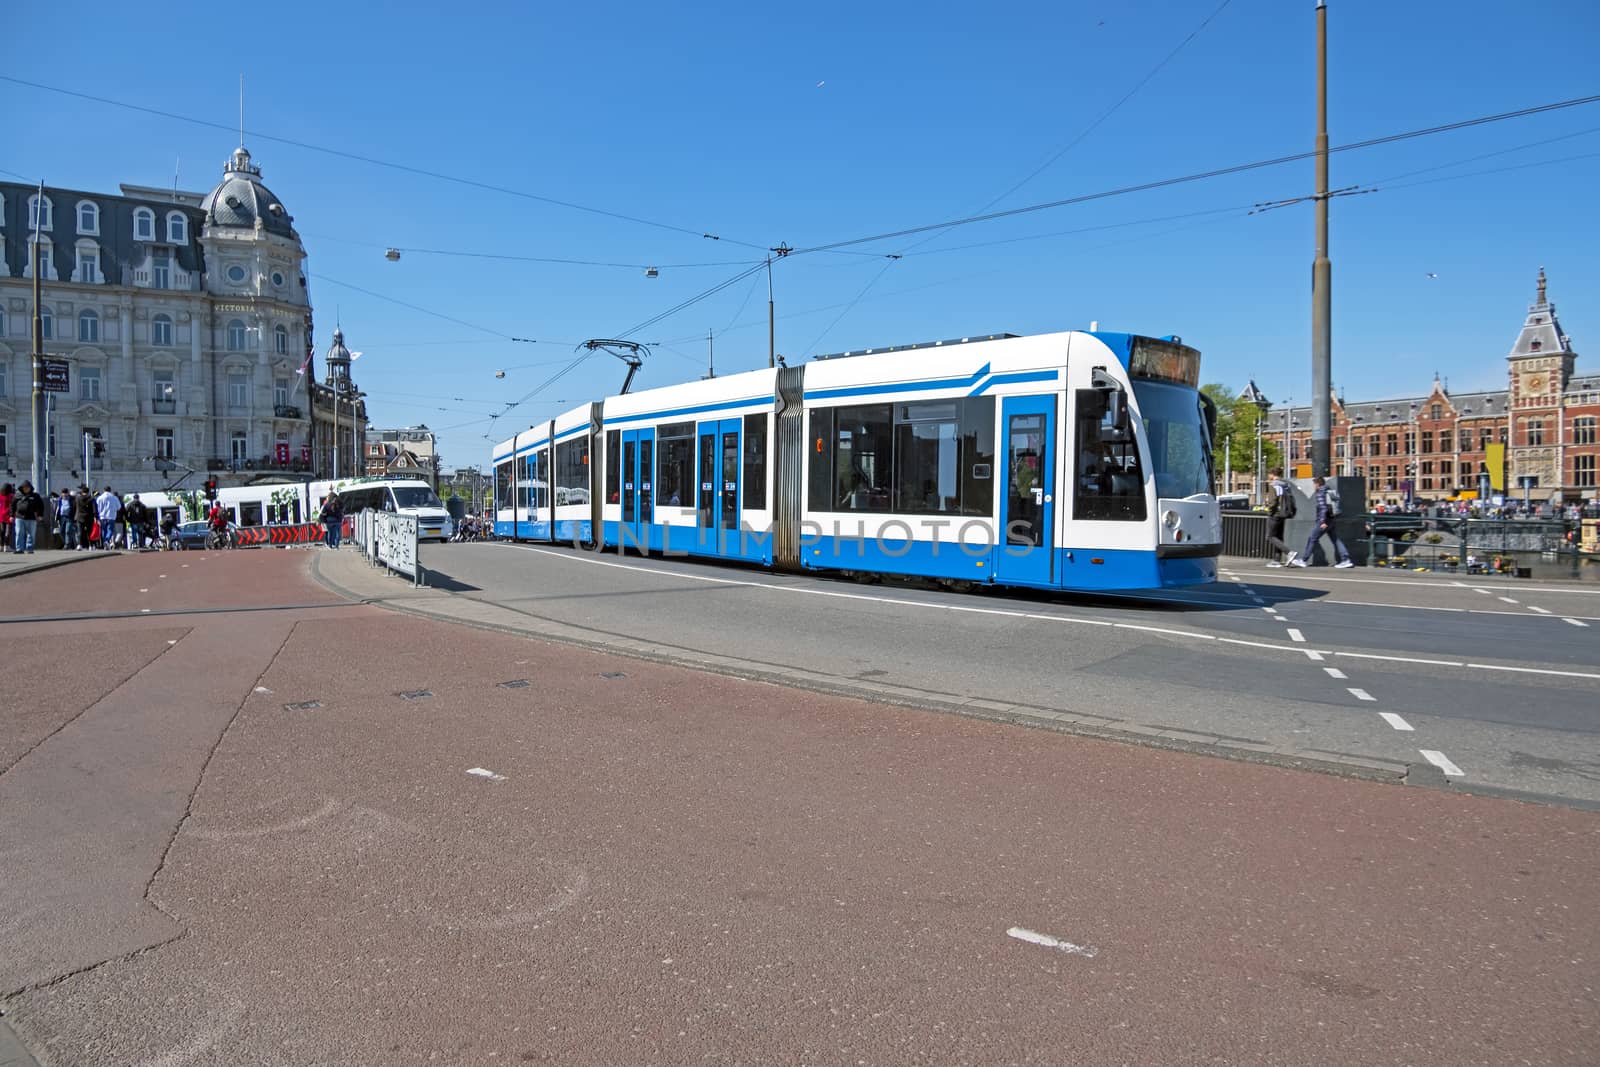 Tram driving in the city center from Amsterdam in the Netherland by devy